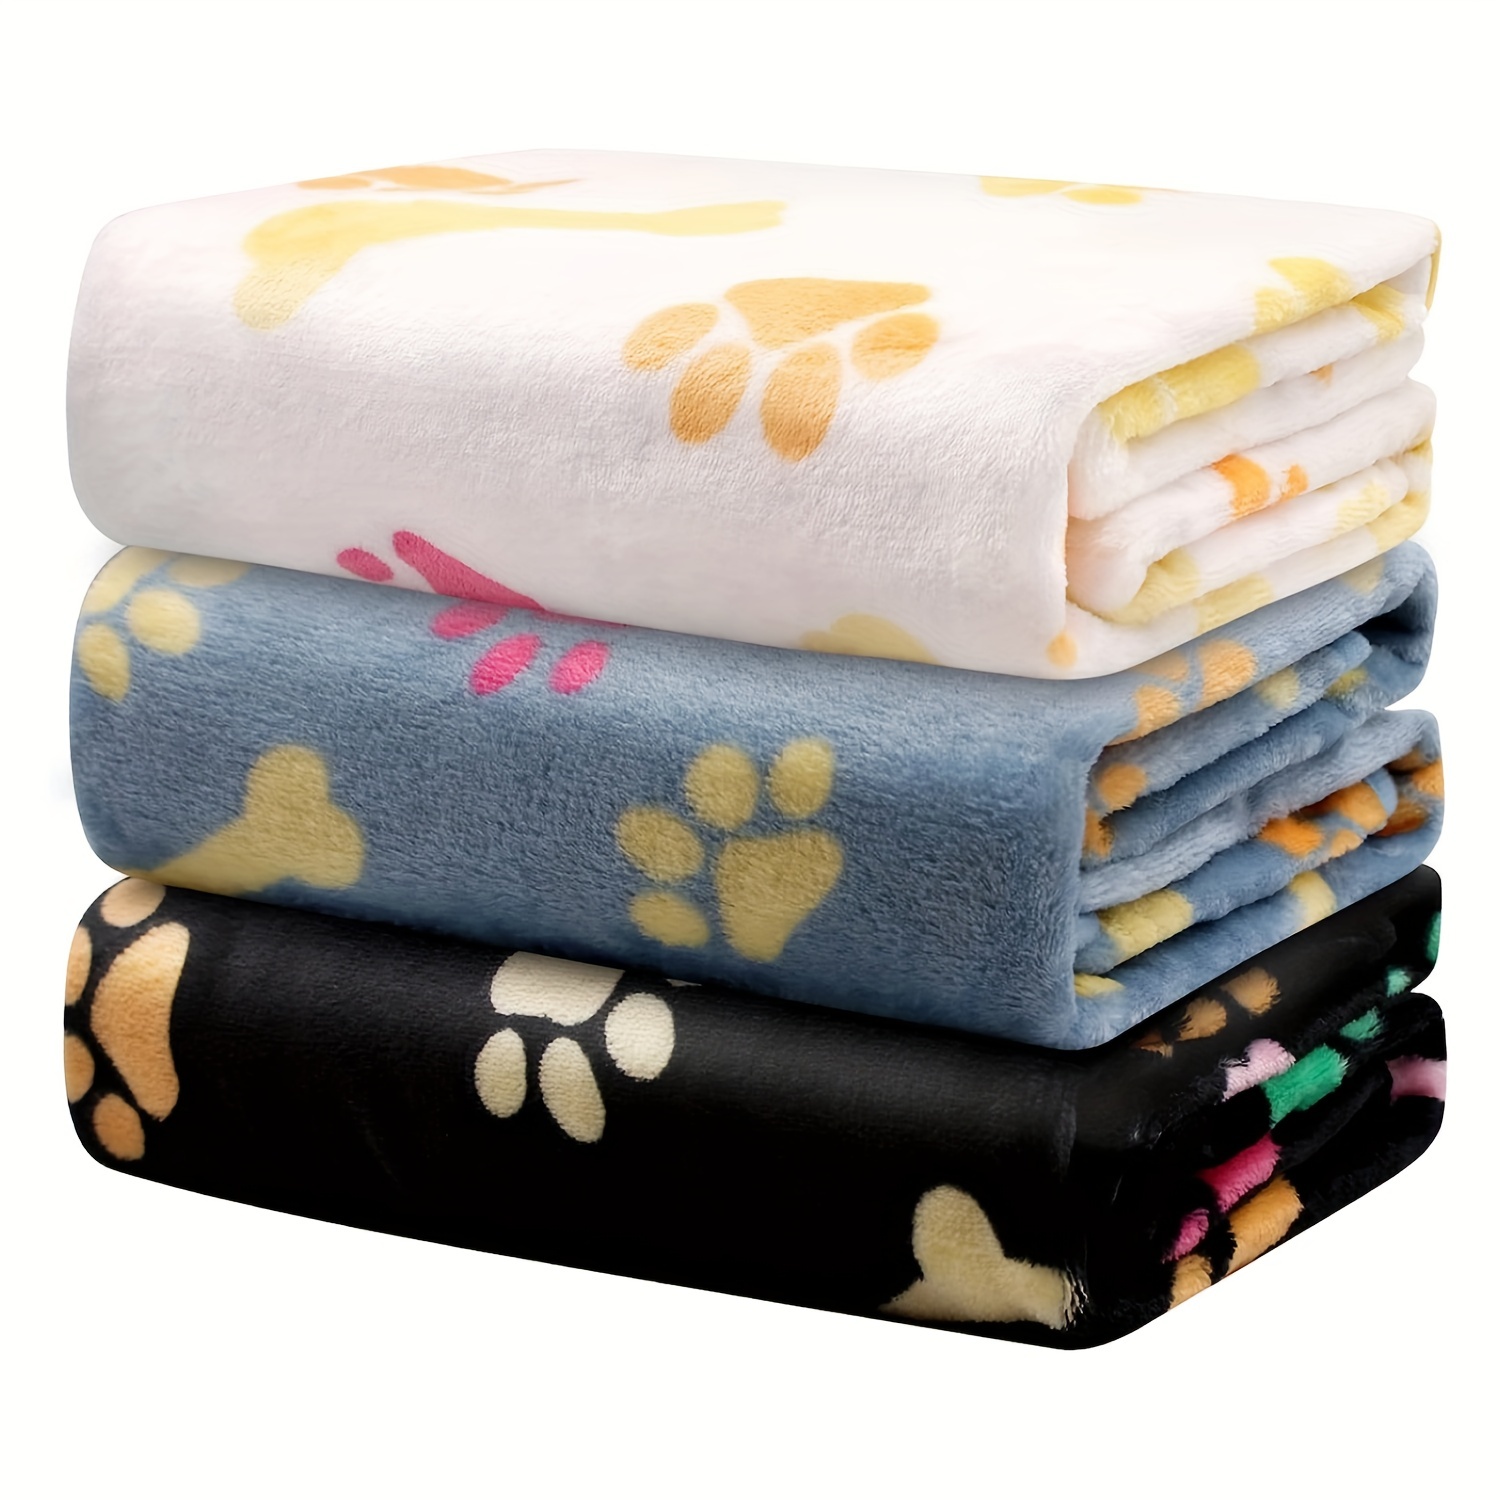  WOWOWMEOW Pet Blanket Paw Print Warm Dog Cat Fleece Blankets  Soft Sleep Mat Bed Cover for Kitten Puppy and Other Small Animals (S,  Brown) : Pet Supplies